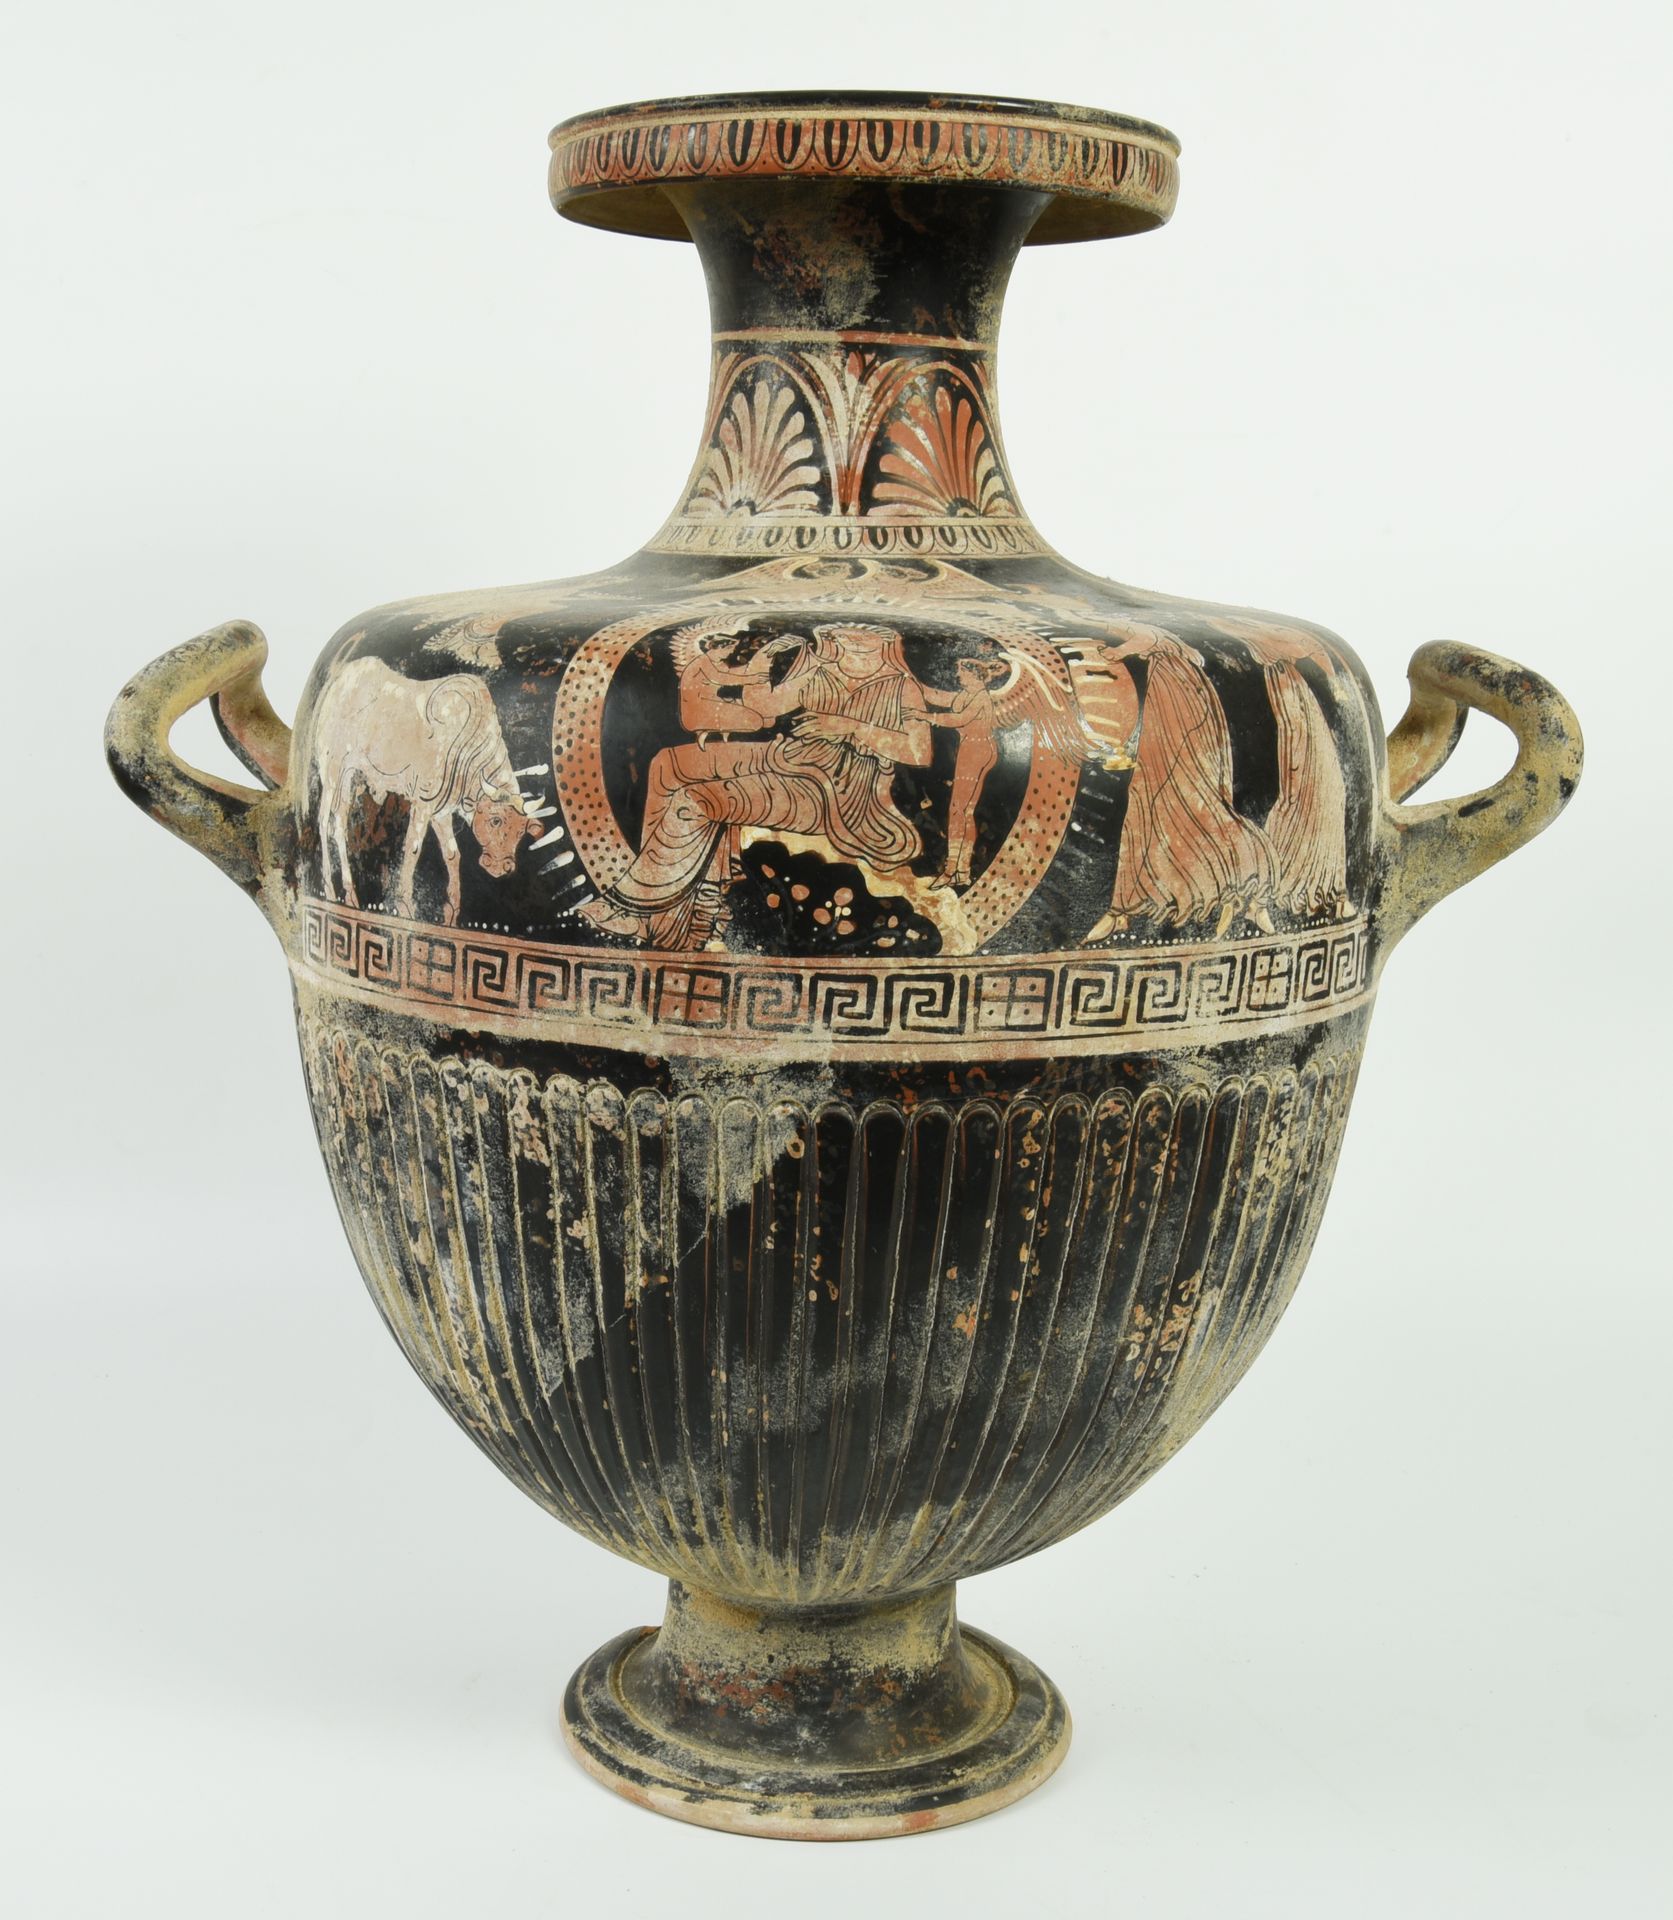 Null HYDRIA APULA WITH RED FIGURES

DATE: 350-330 BC.

MATERIAL AND TECHNIQUE: p&hellip;